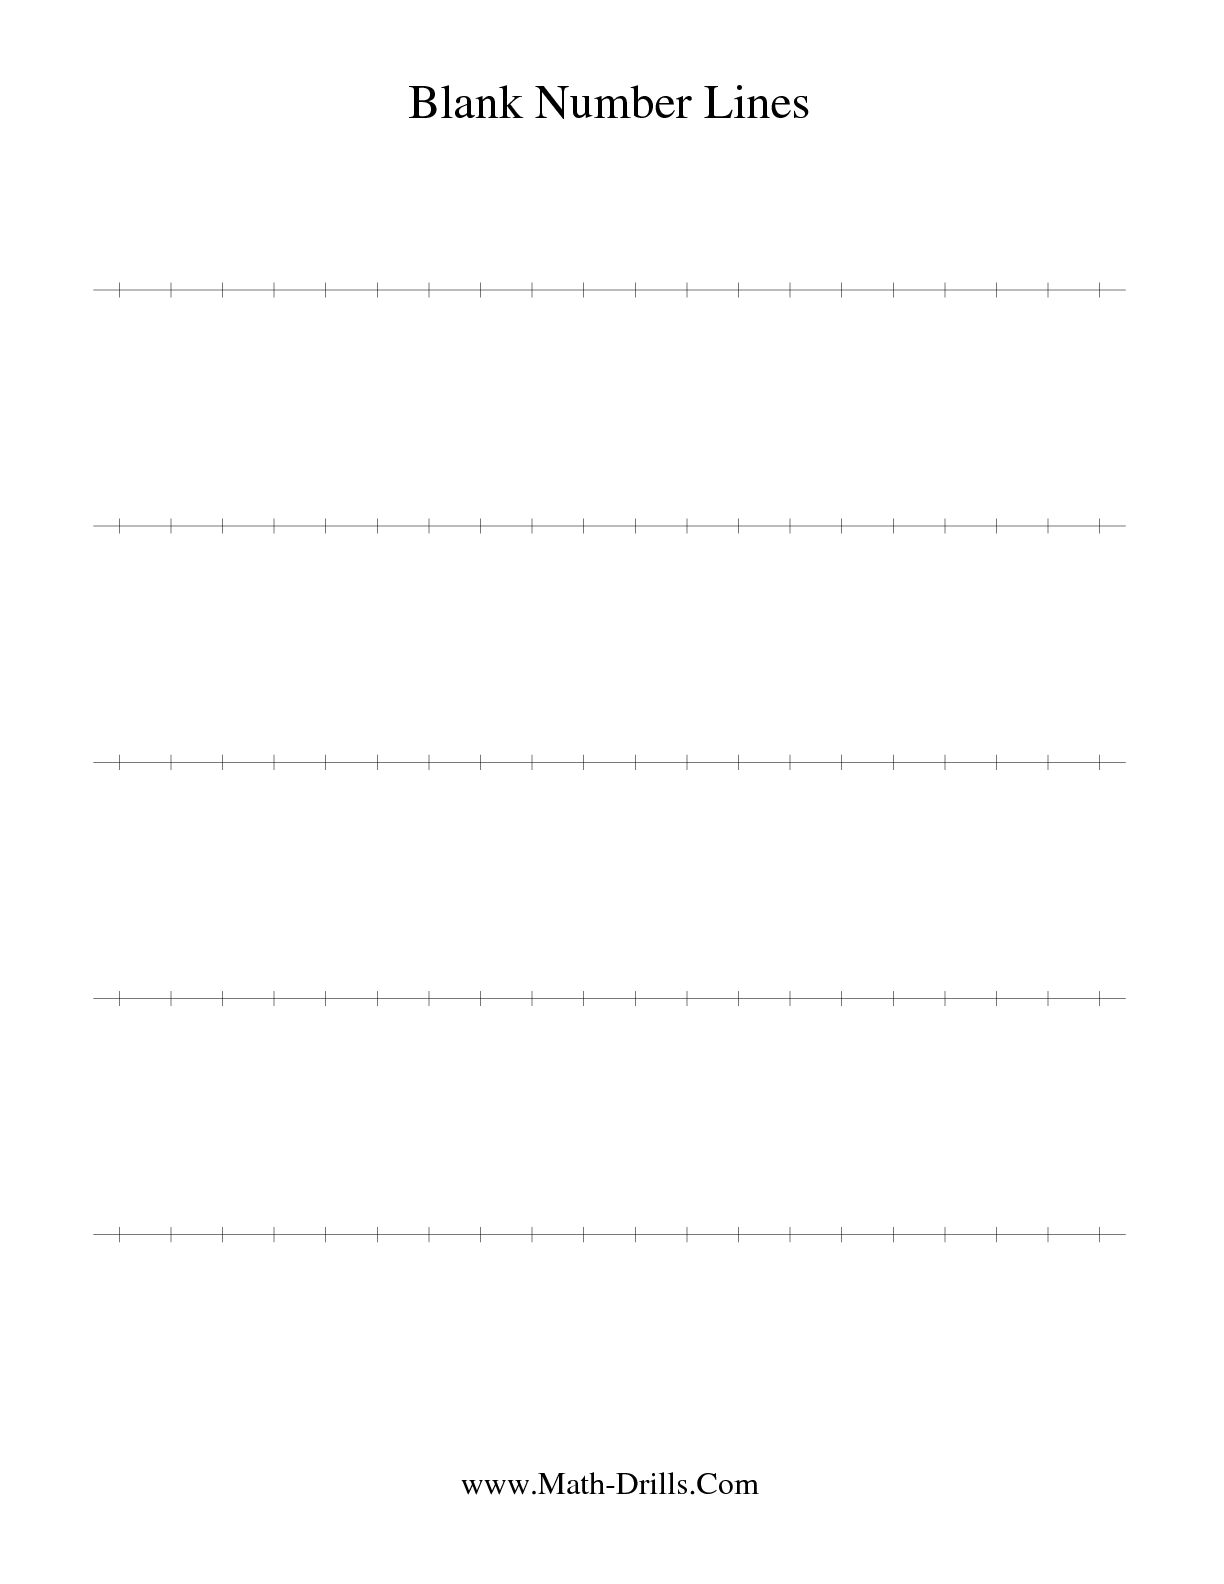 7 Best Images of Blank Printable Math Worksheets - Blank Math Addition